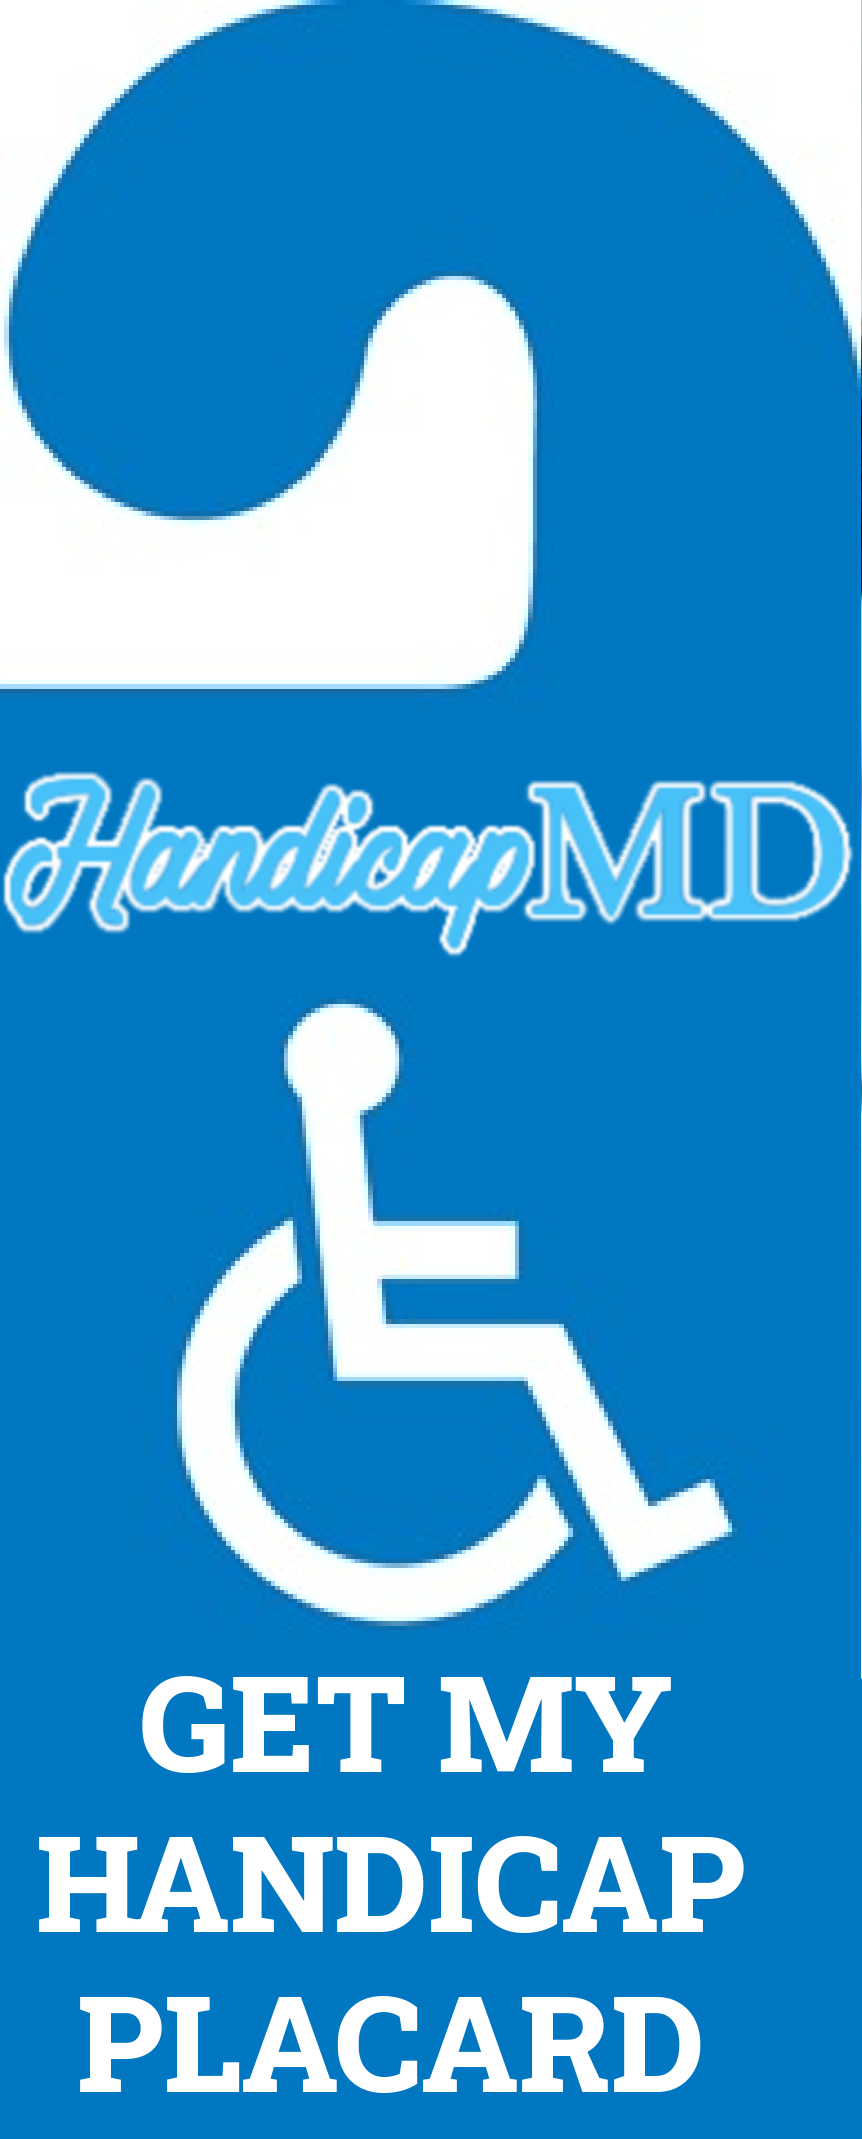 Myths vs. Facts: Debunking Common Misconceptions about Handicap Placards in Vermont